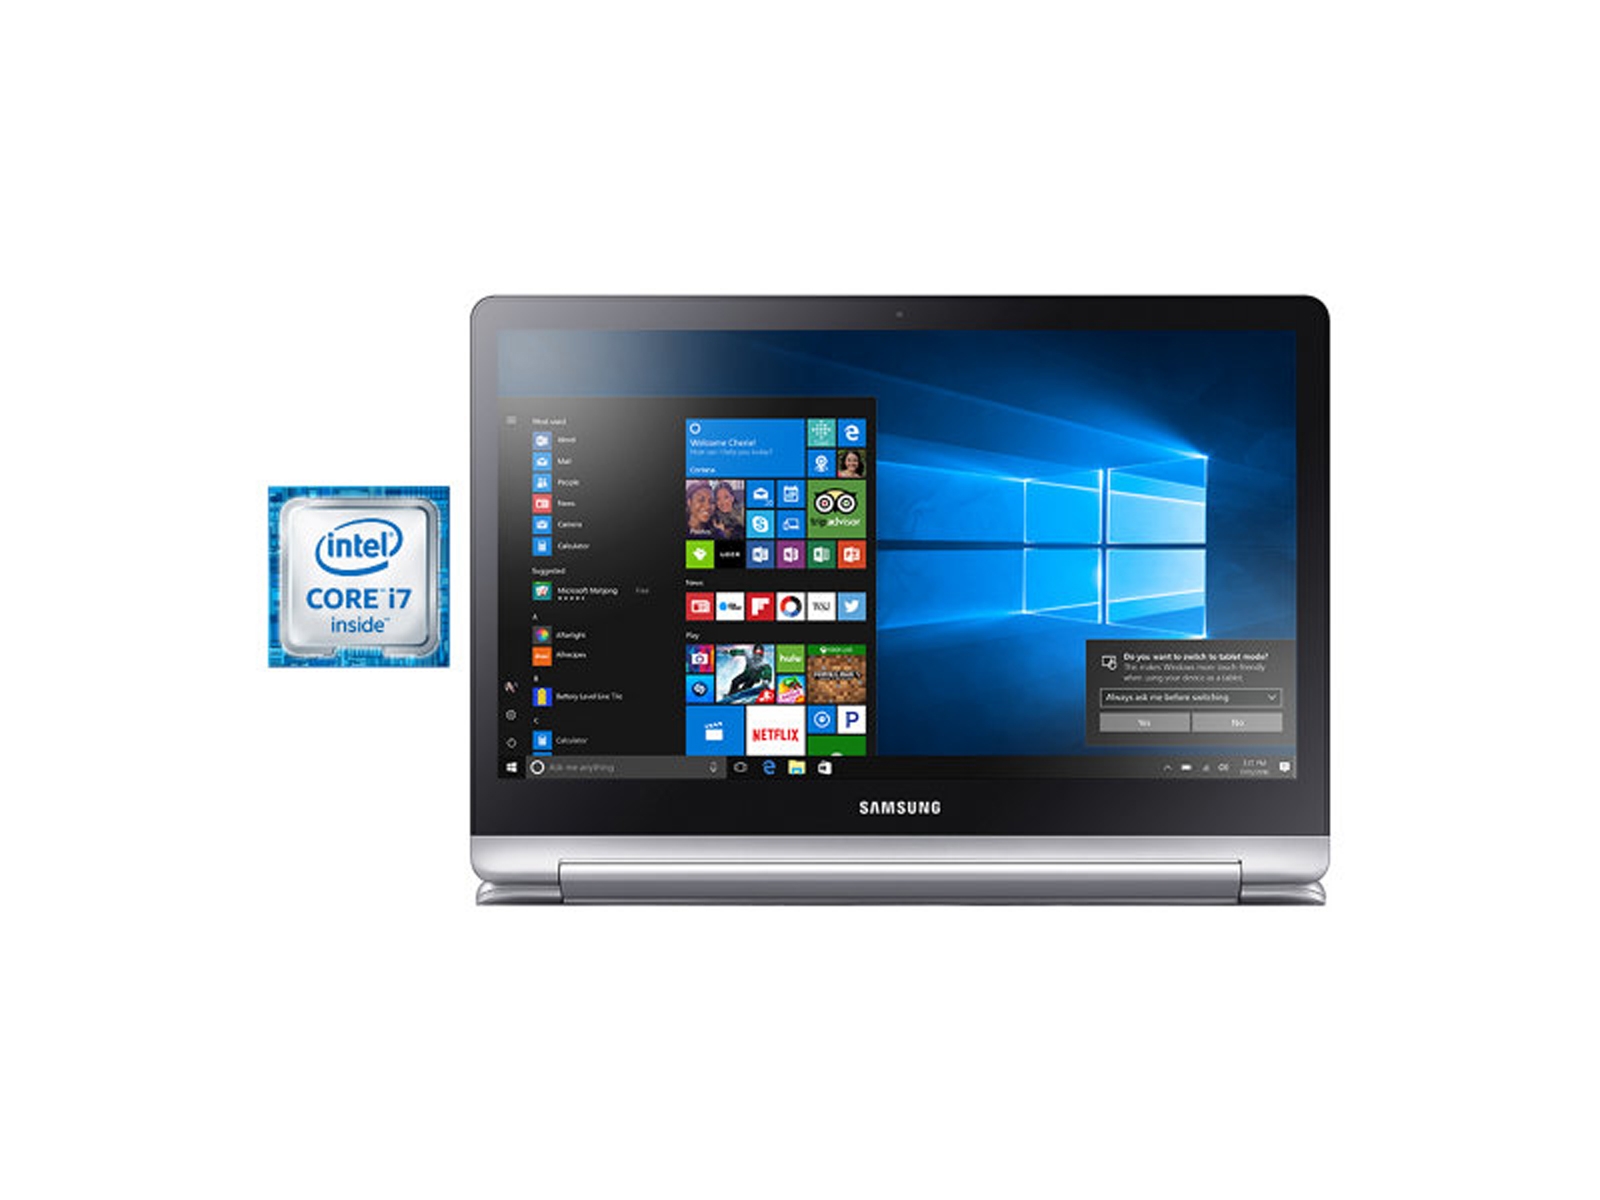 Thumbnail image of Notebook 7 spin 15.6” (16GB RAM)